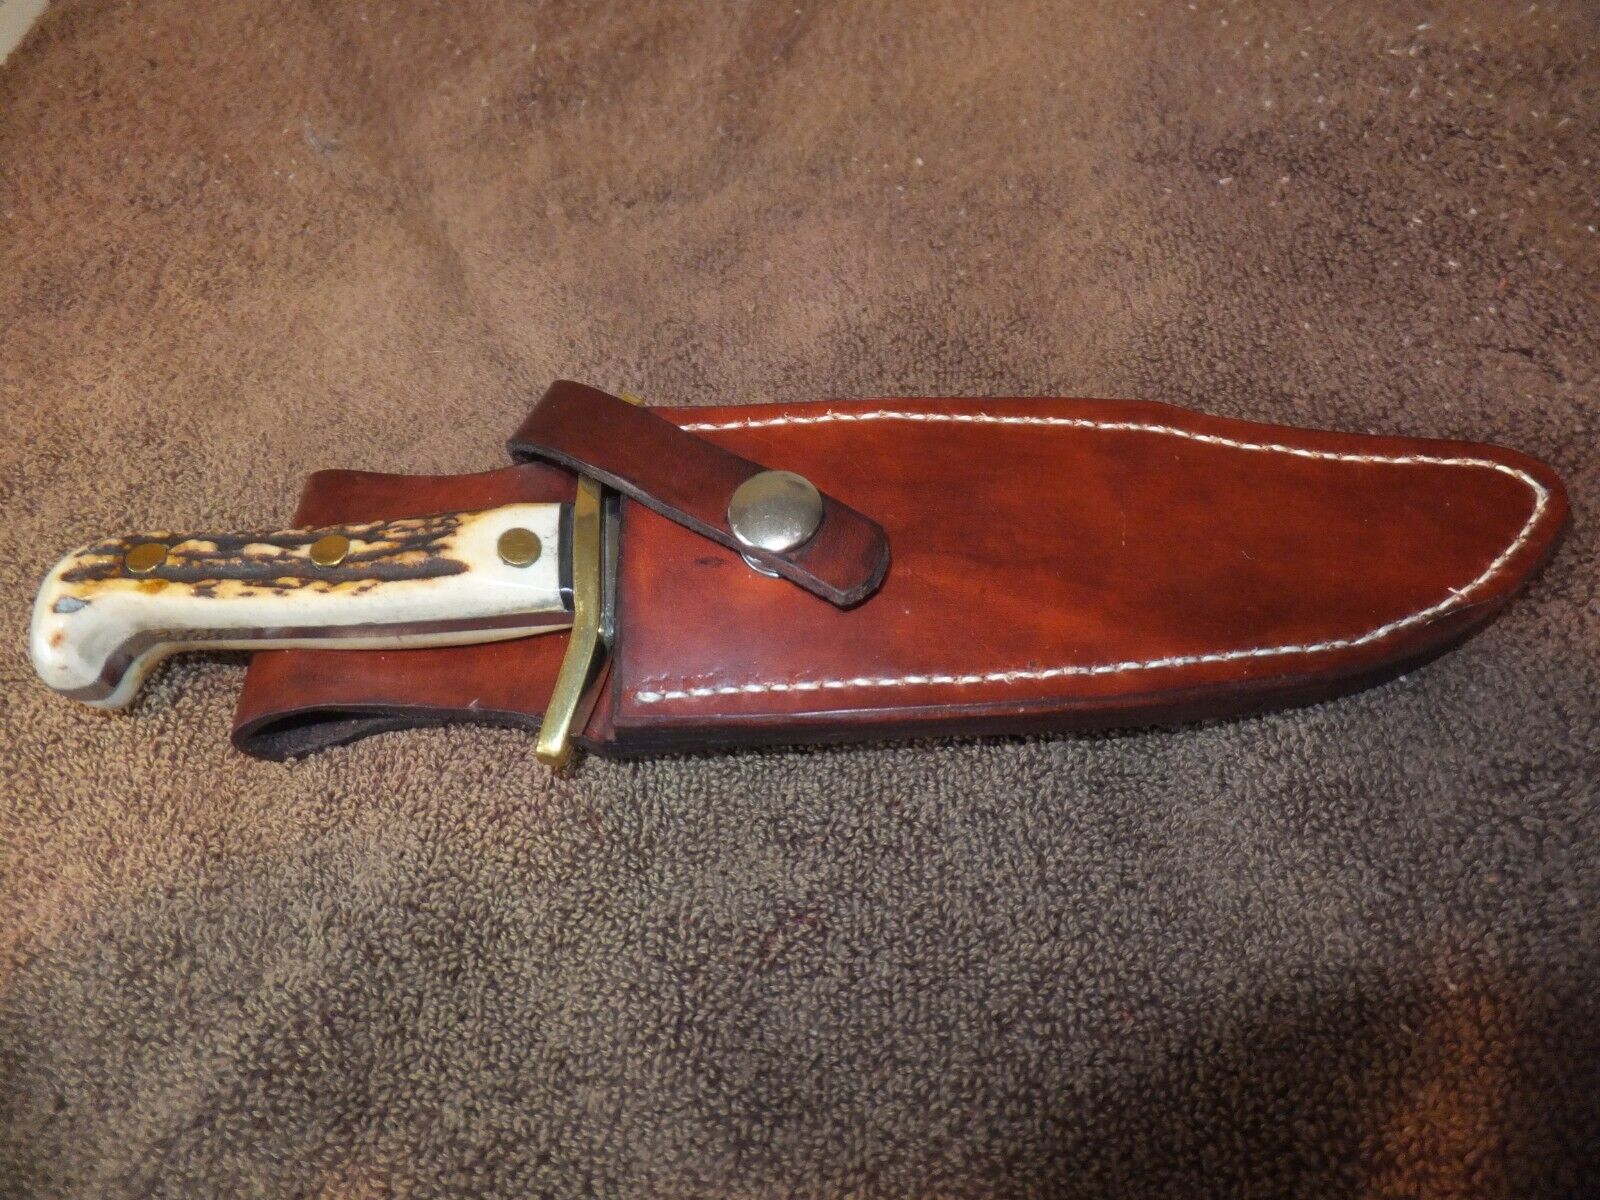 Extremely RARE, Western Cutlery model 45 Bowie knife w/ custom stag handles.